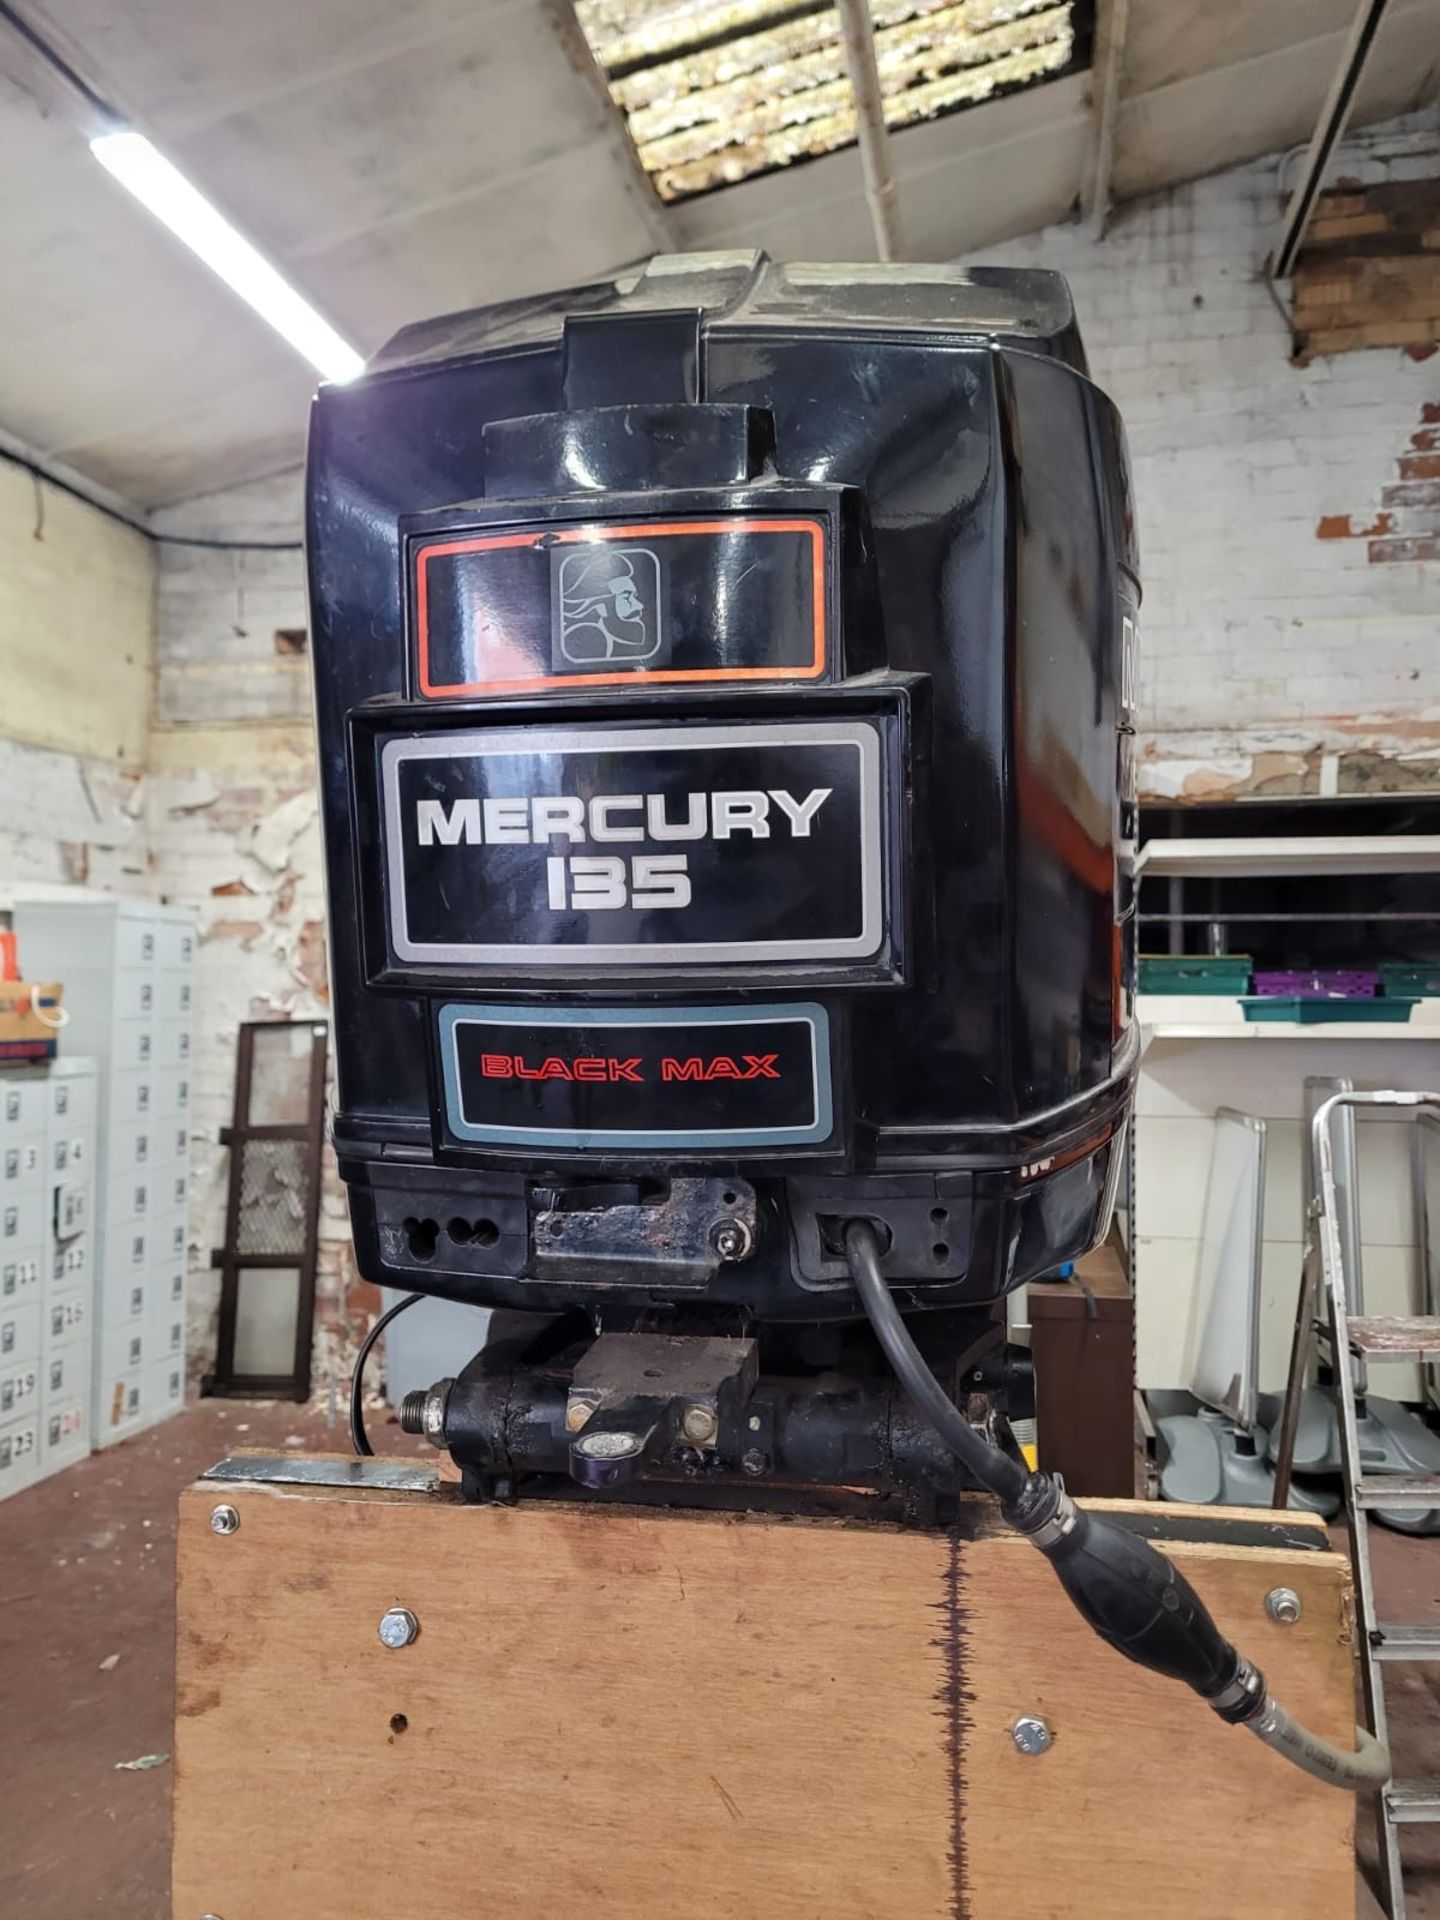 Mercury 135 Black Max 2.0L Outboard Motor and Part - Image 2 of 5